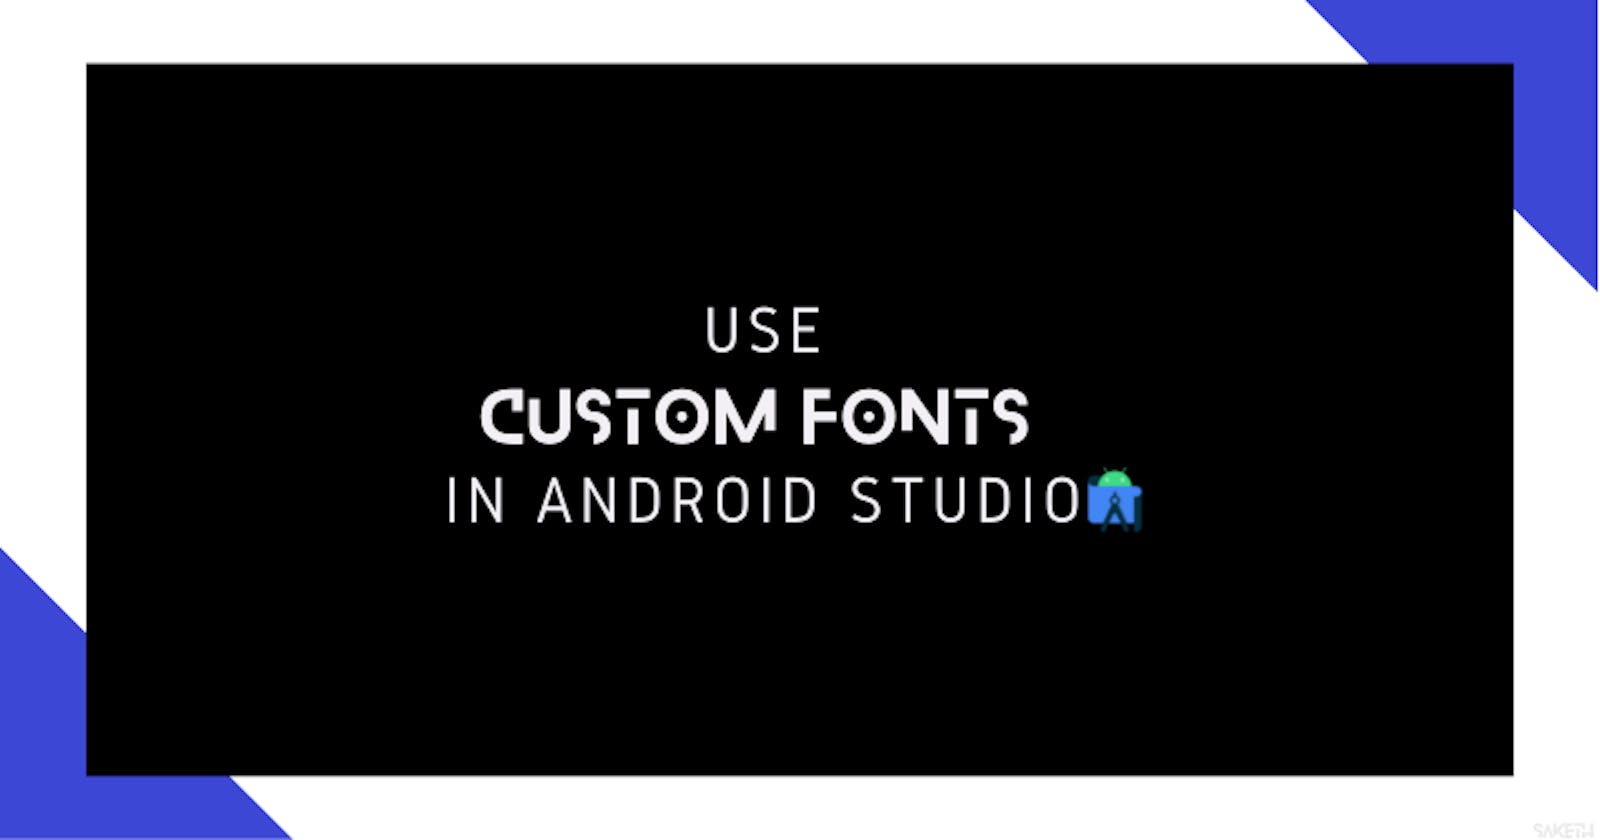 This Is How You Can Use Custom Fonts In Android Studio